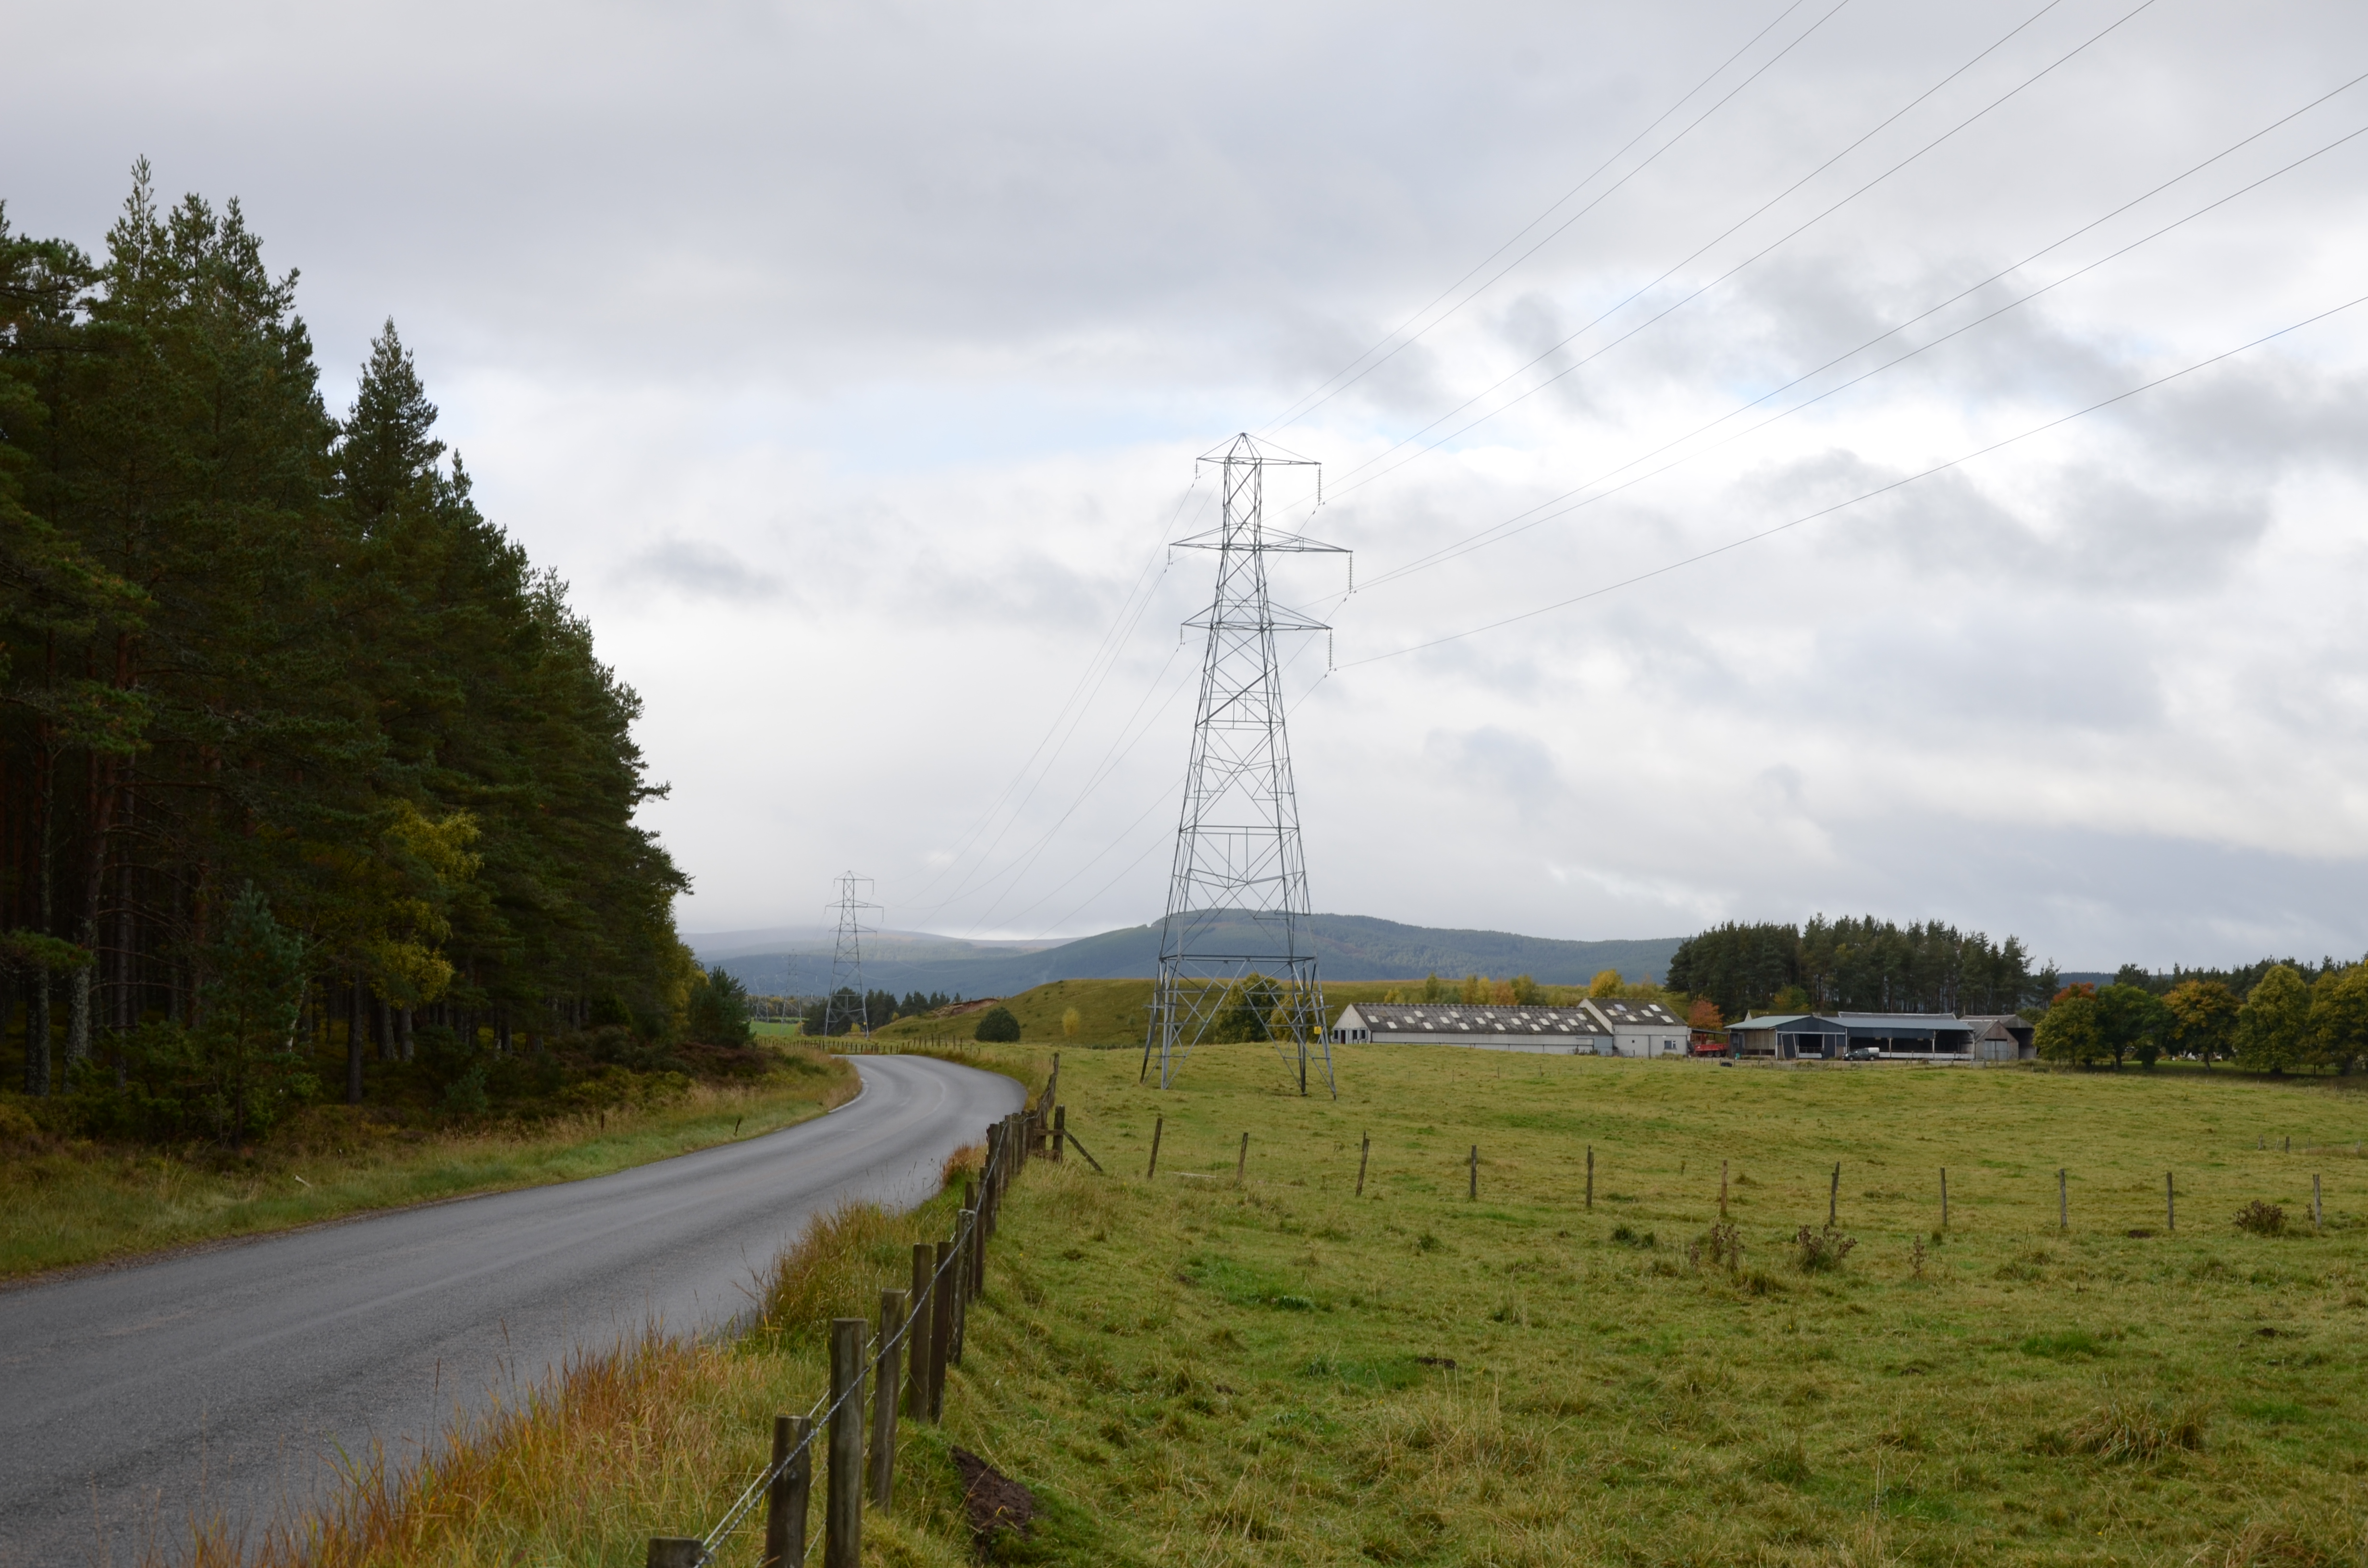 Metal transmission towers forming an overhead line over fields next to a road.